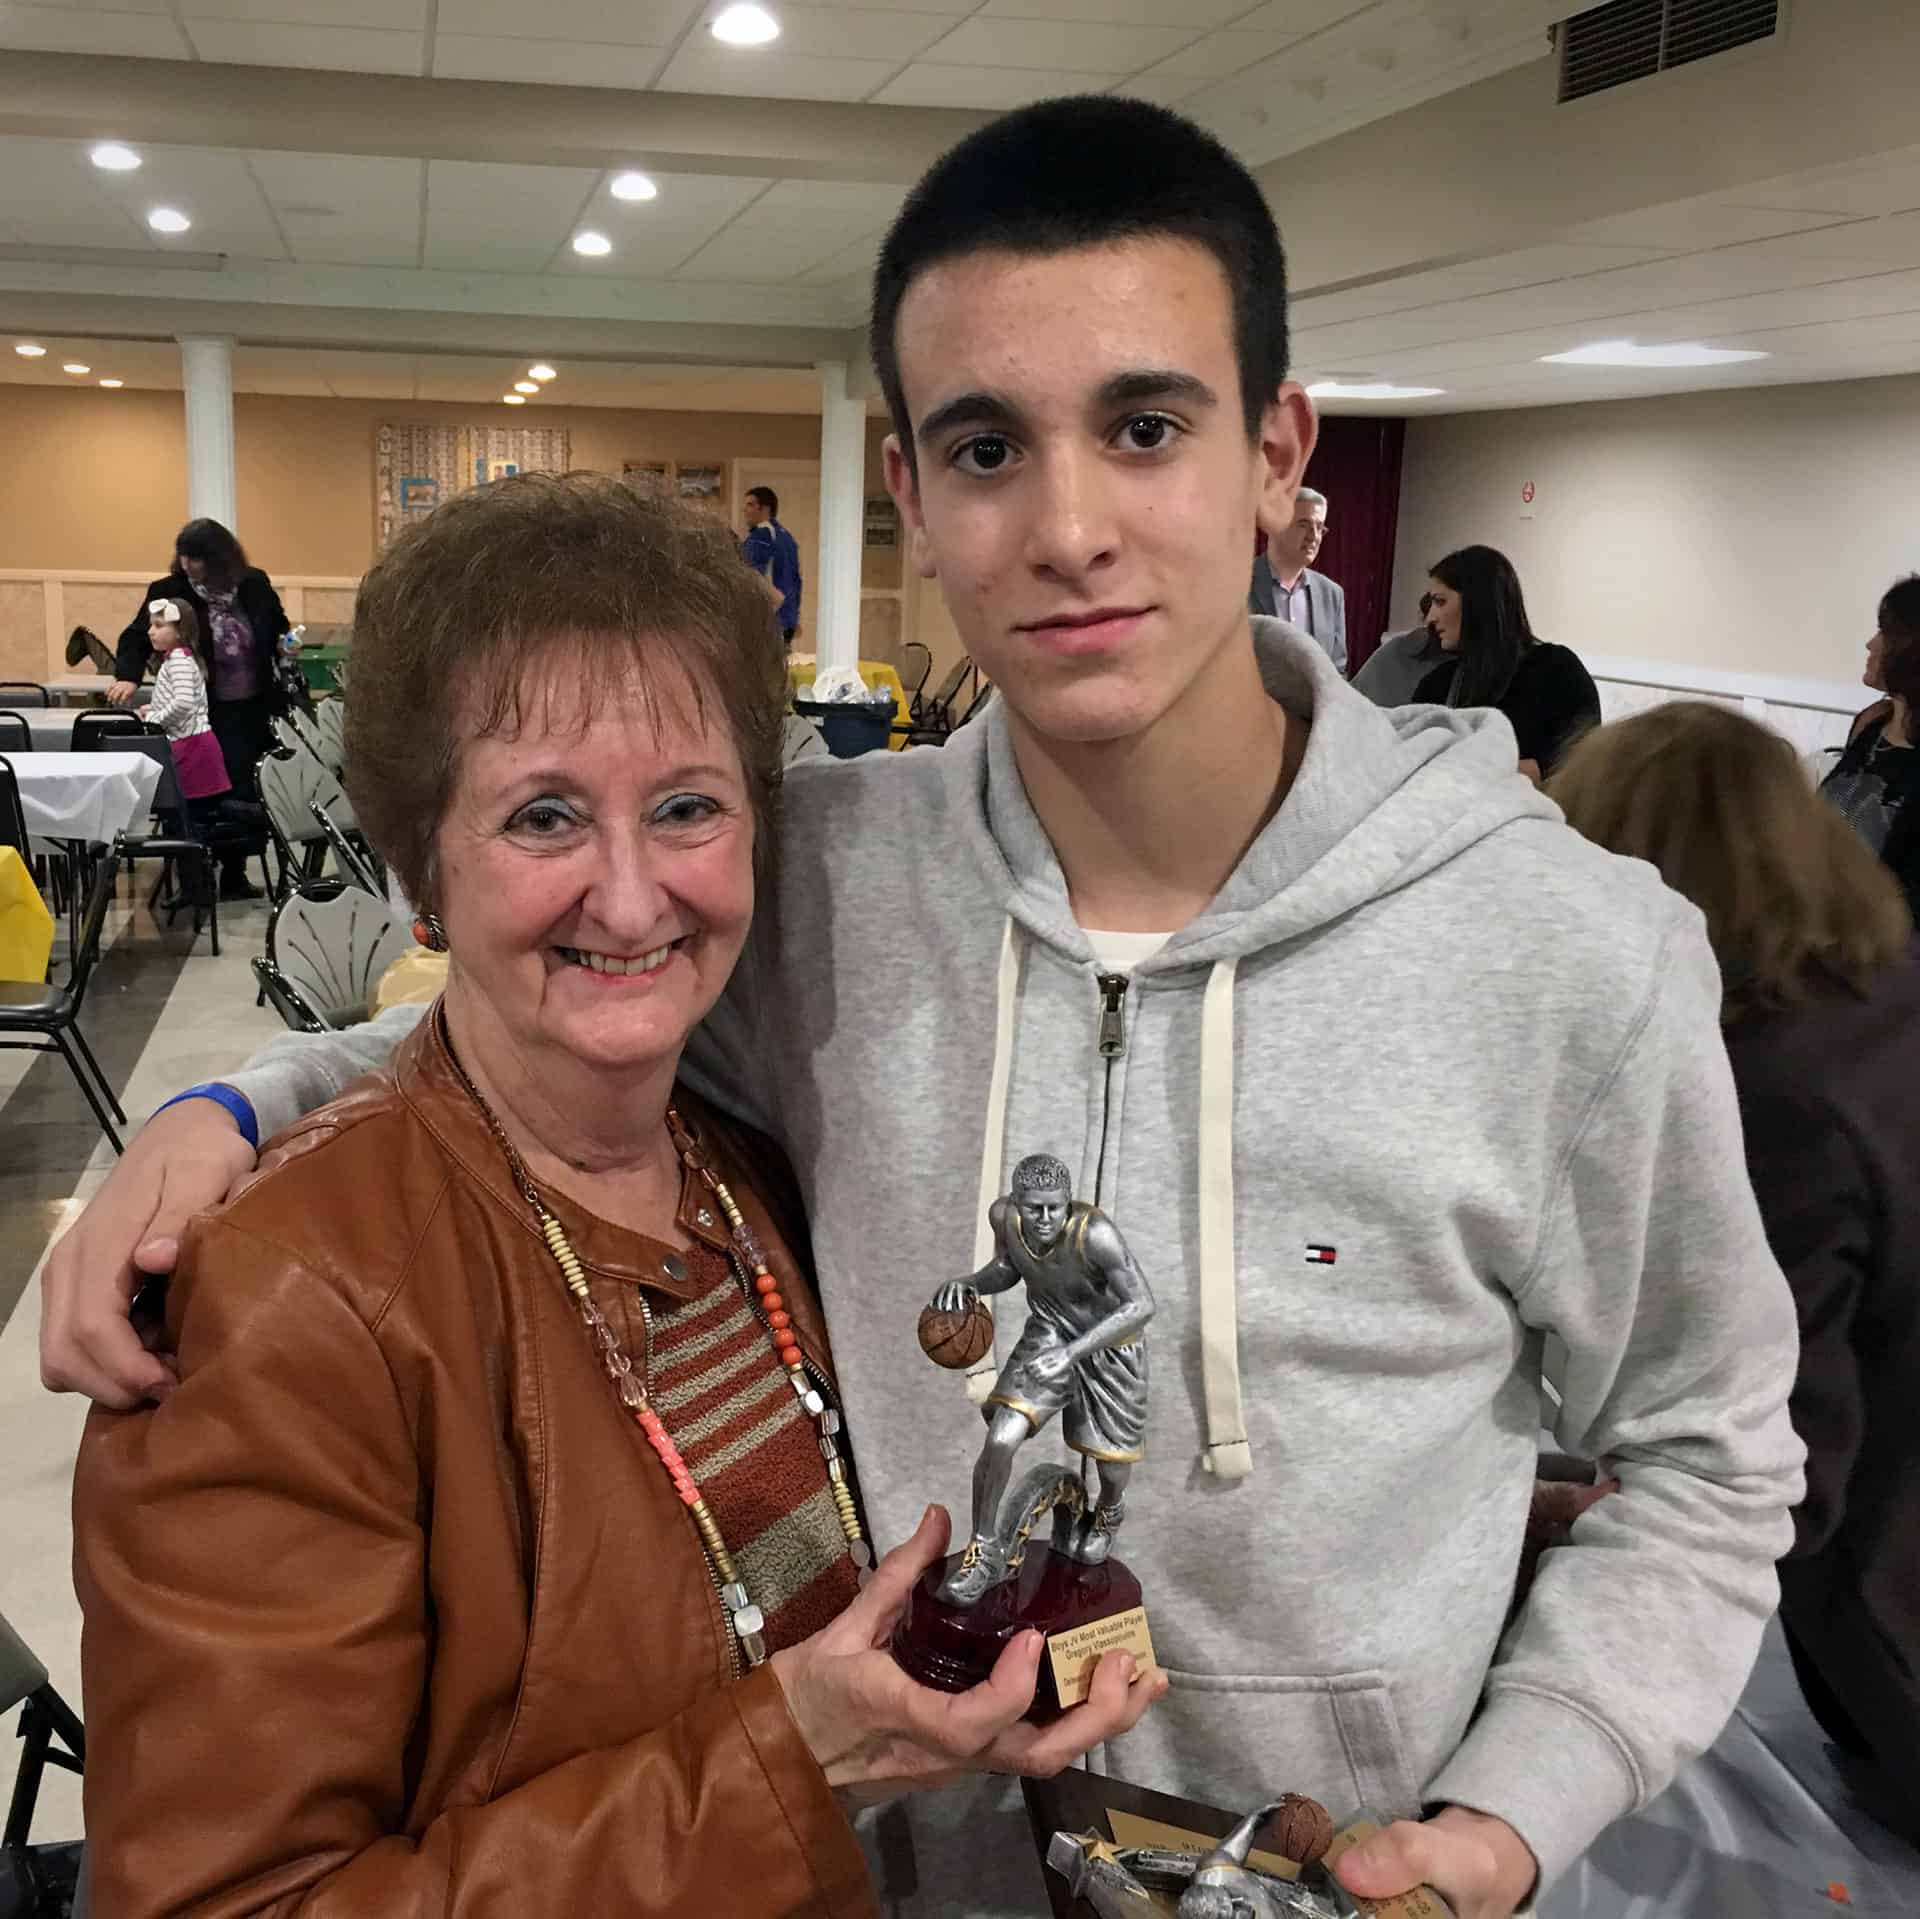 Greg Vlassopoulos with his grandmother at the GOYA Awards Ceremony holding the MVP trophy